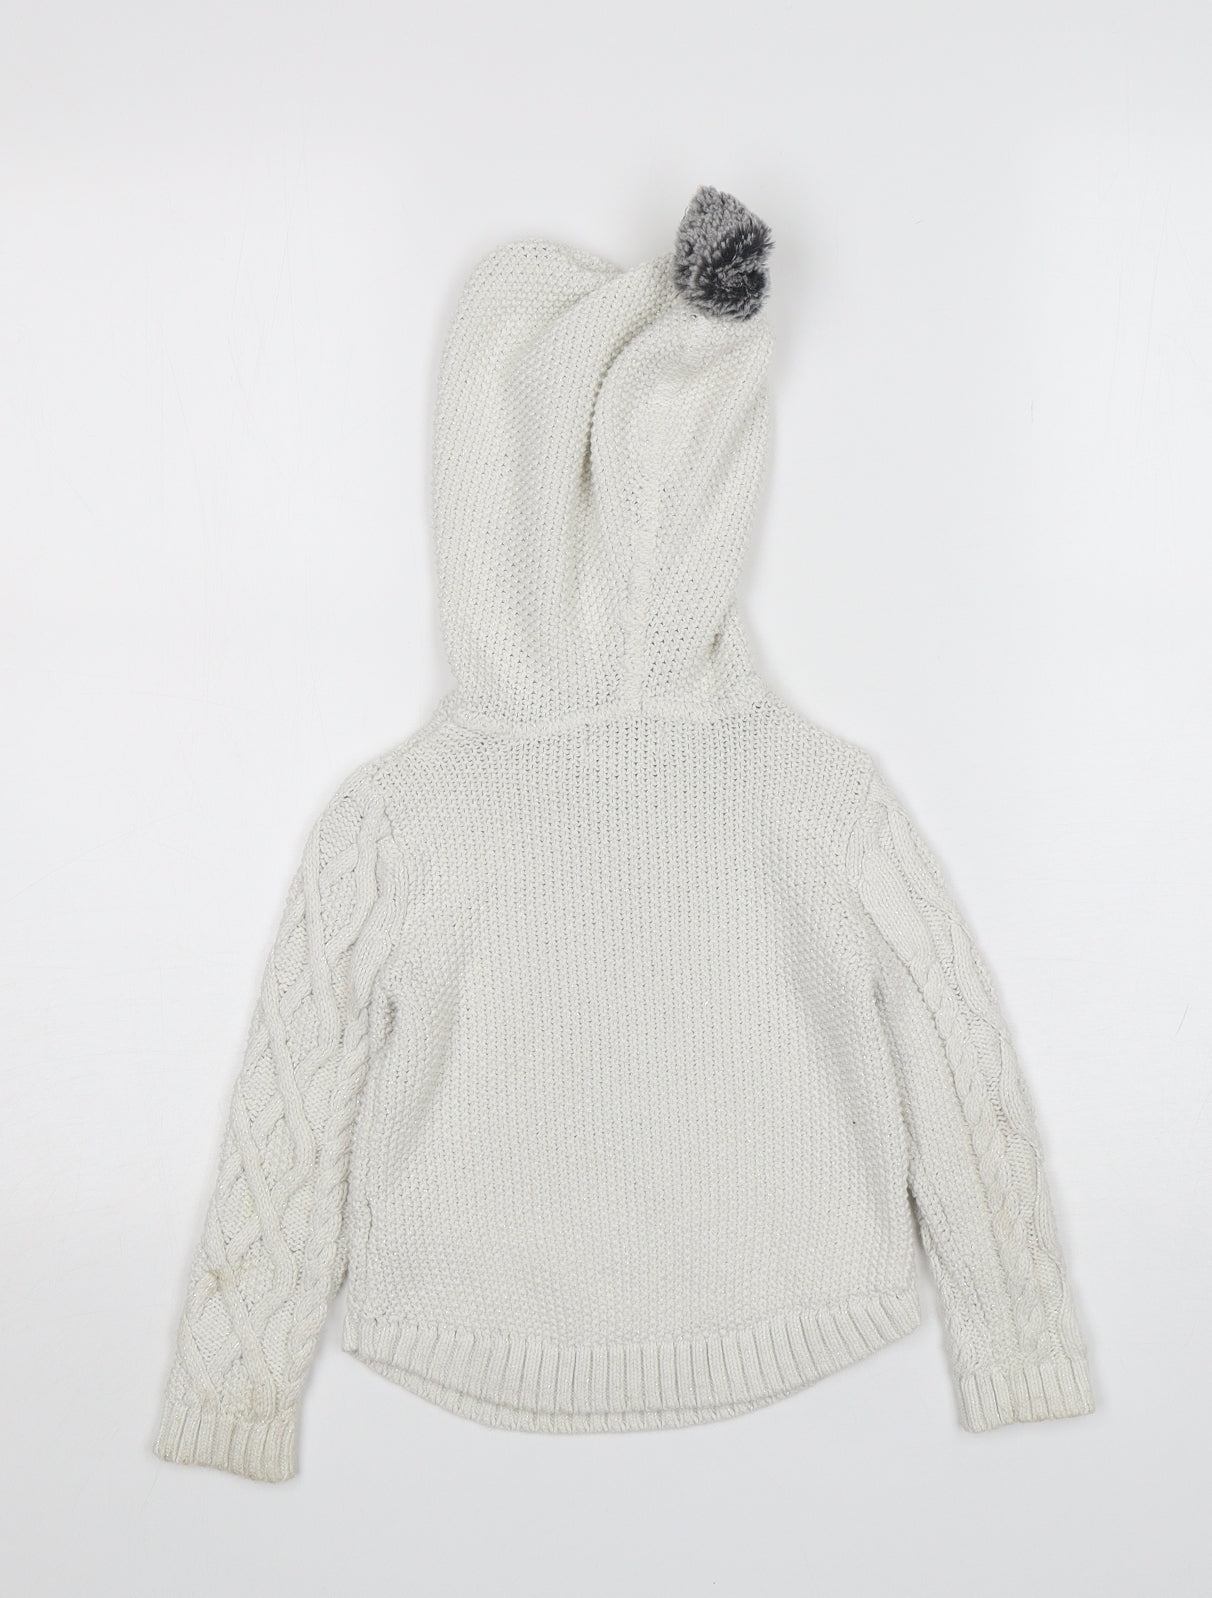 Aspen Girls White  Cotton Pullover Hoodie Size 3 Years